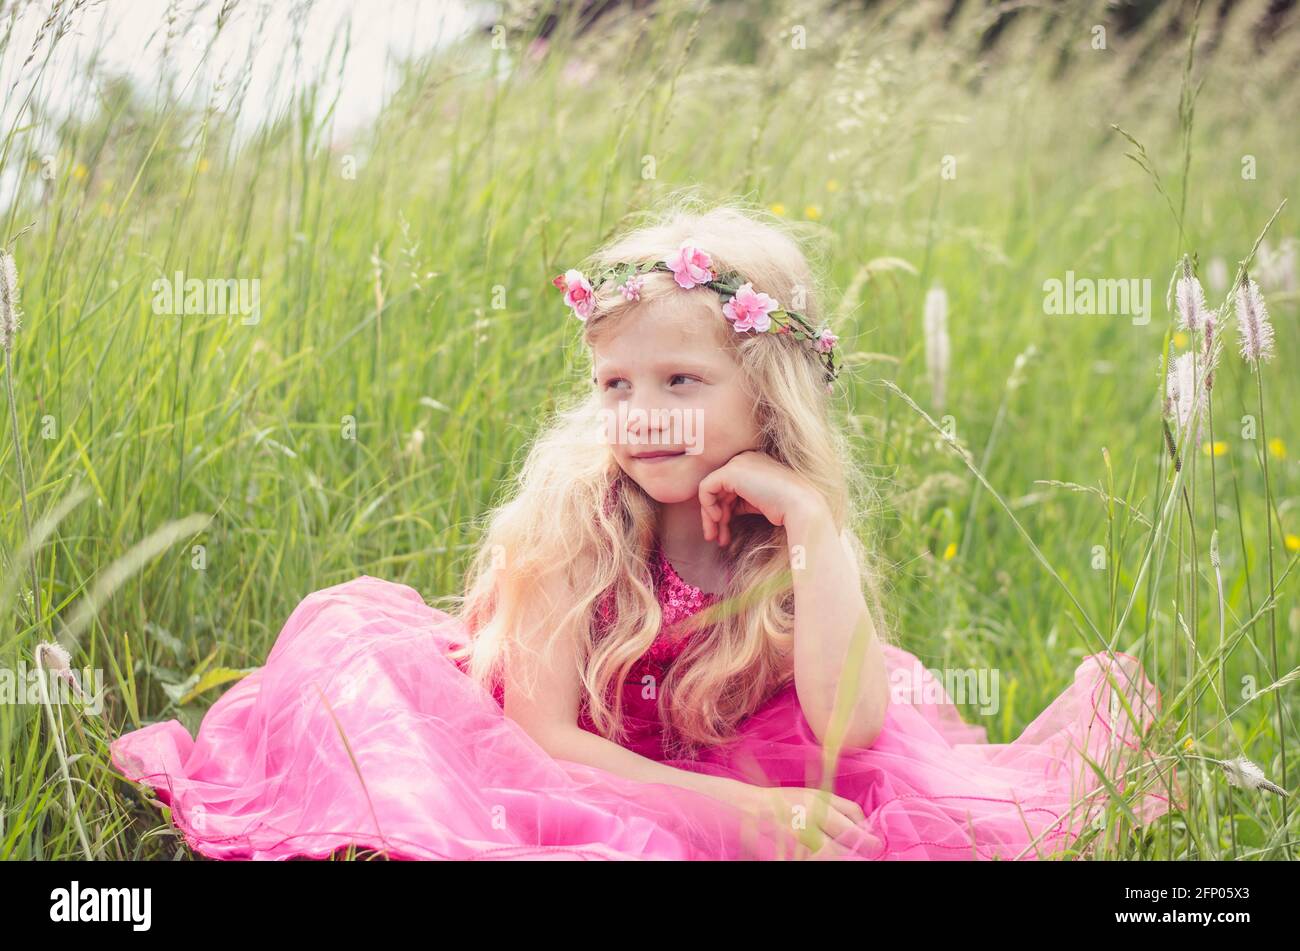 beautiful blond girl in pink dress thinking in the grass Stock Photo